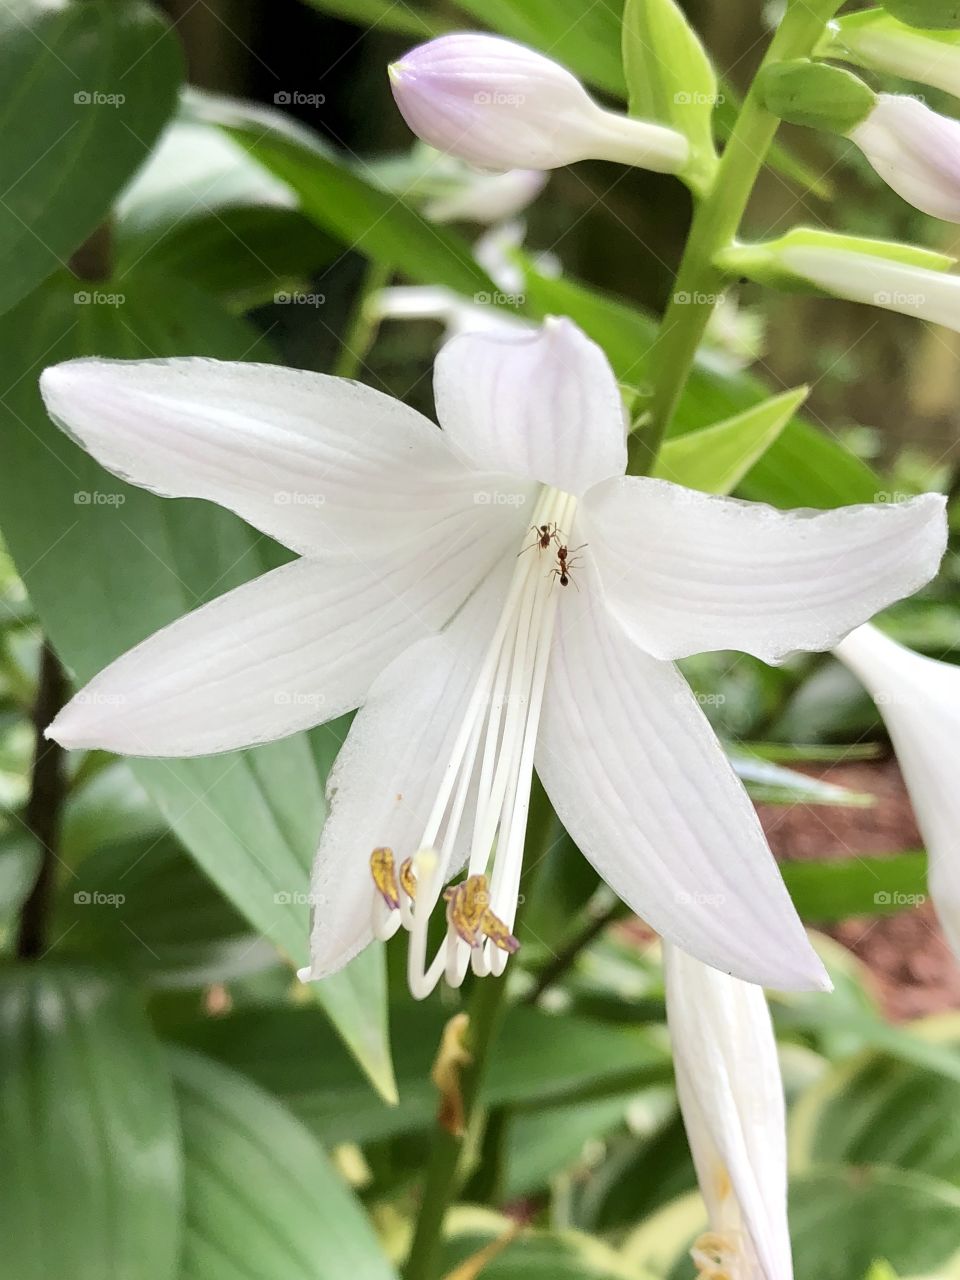 Lovely white lilies, tiny and tender, perfume the air around me. Cream overflows throughout the edges of greenery.